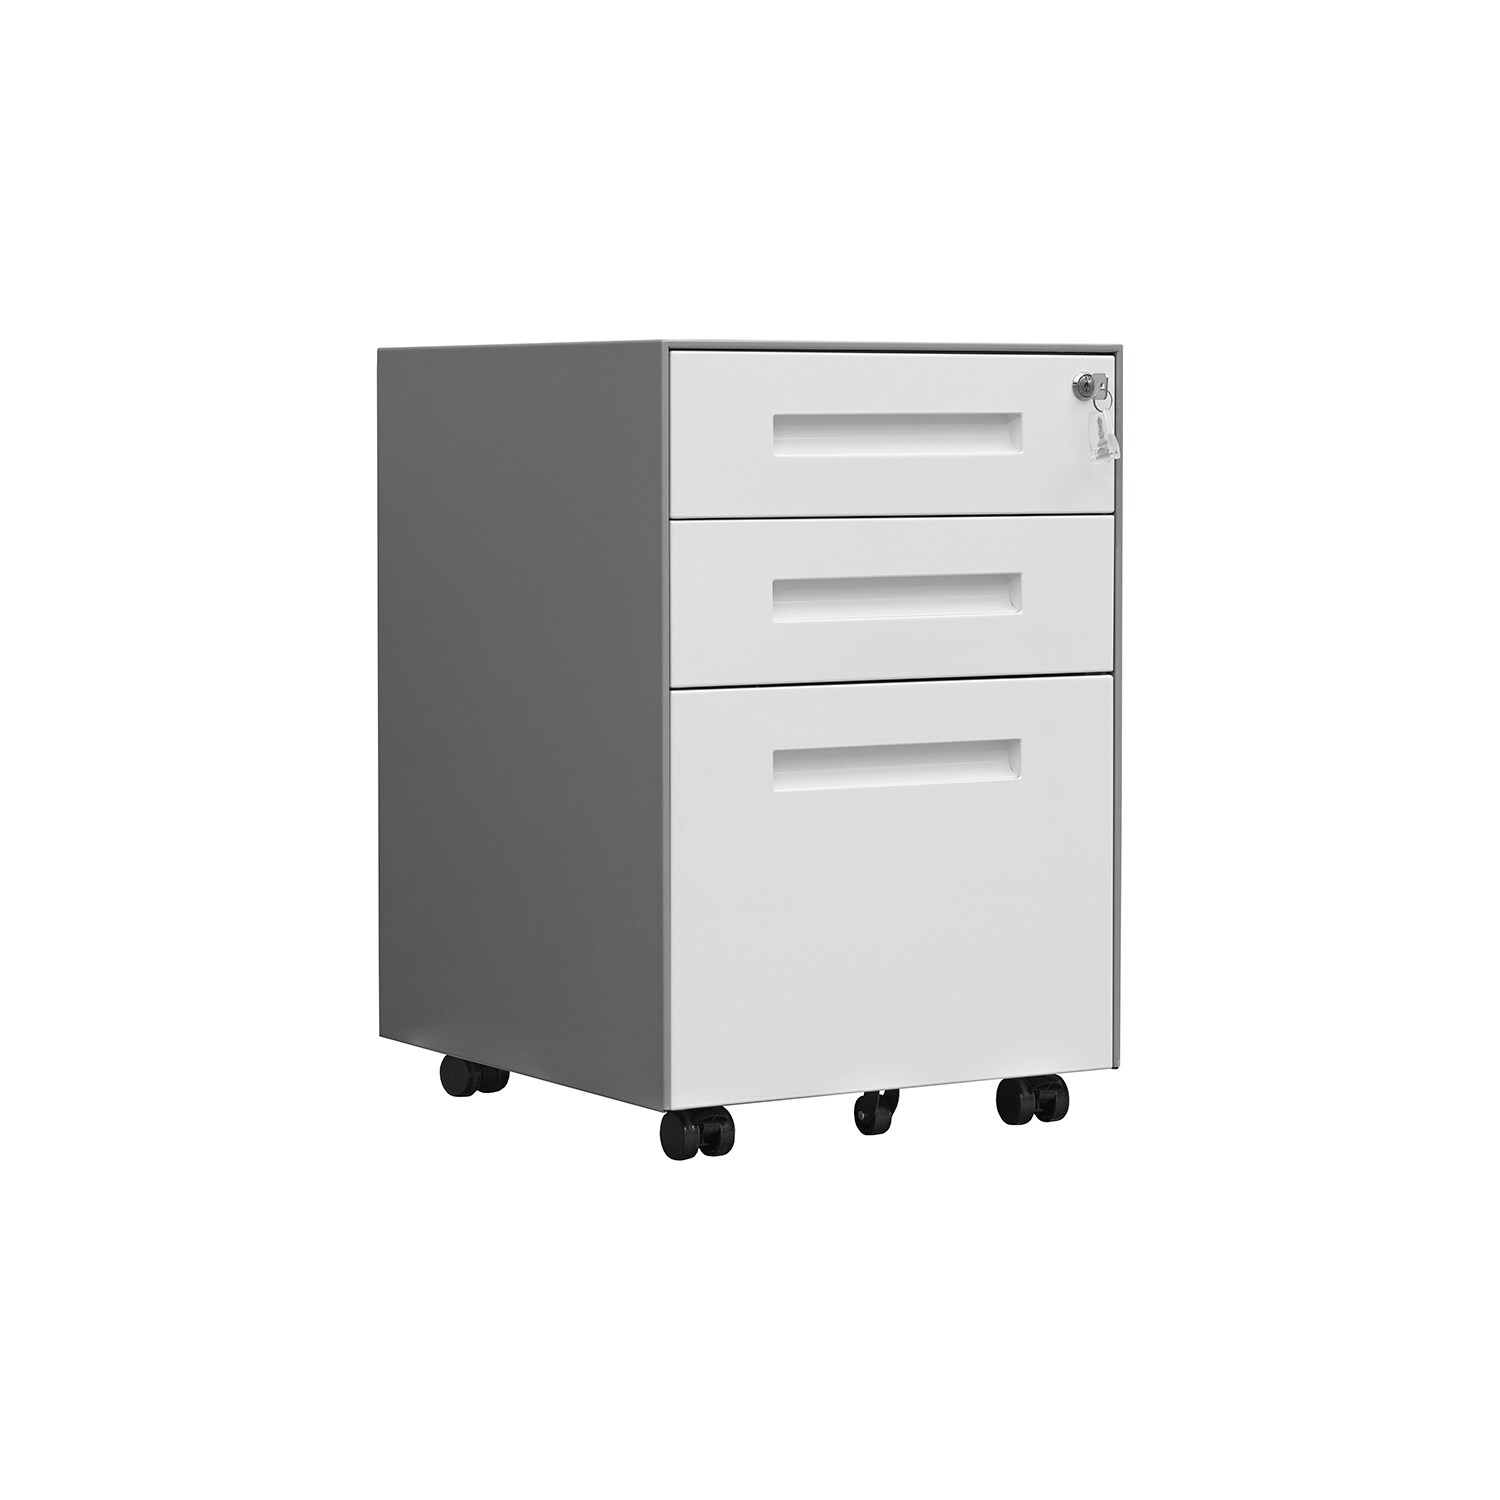 3 Drawer File Cabinet File Cabinets at Lowes.com